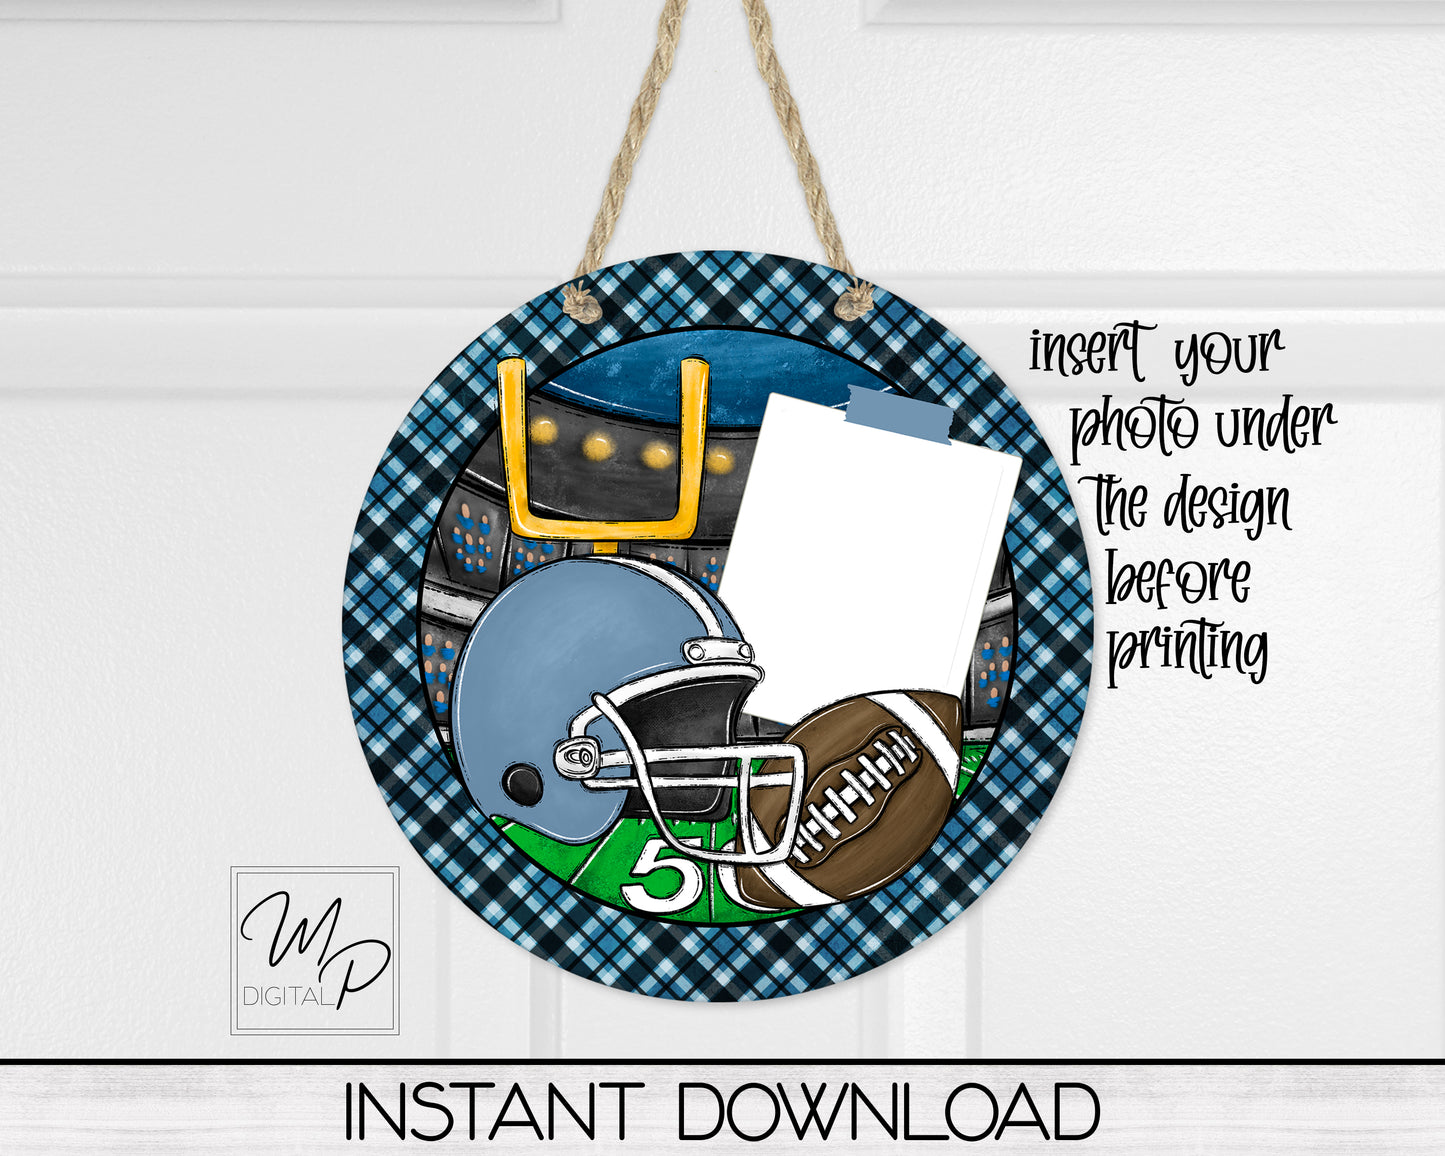 10 Colors Football PNG Digital Download for Sublimation of Ornaments, Wall Hanging, Keychains